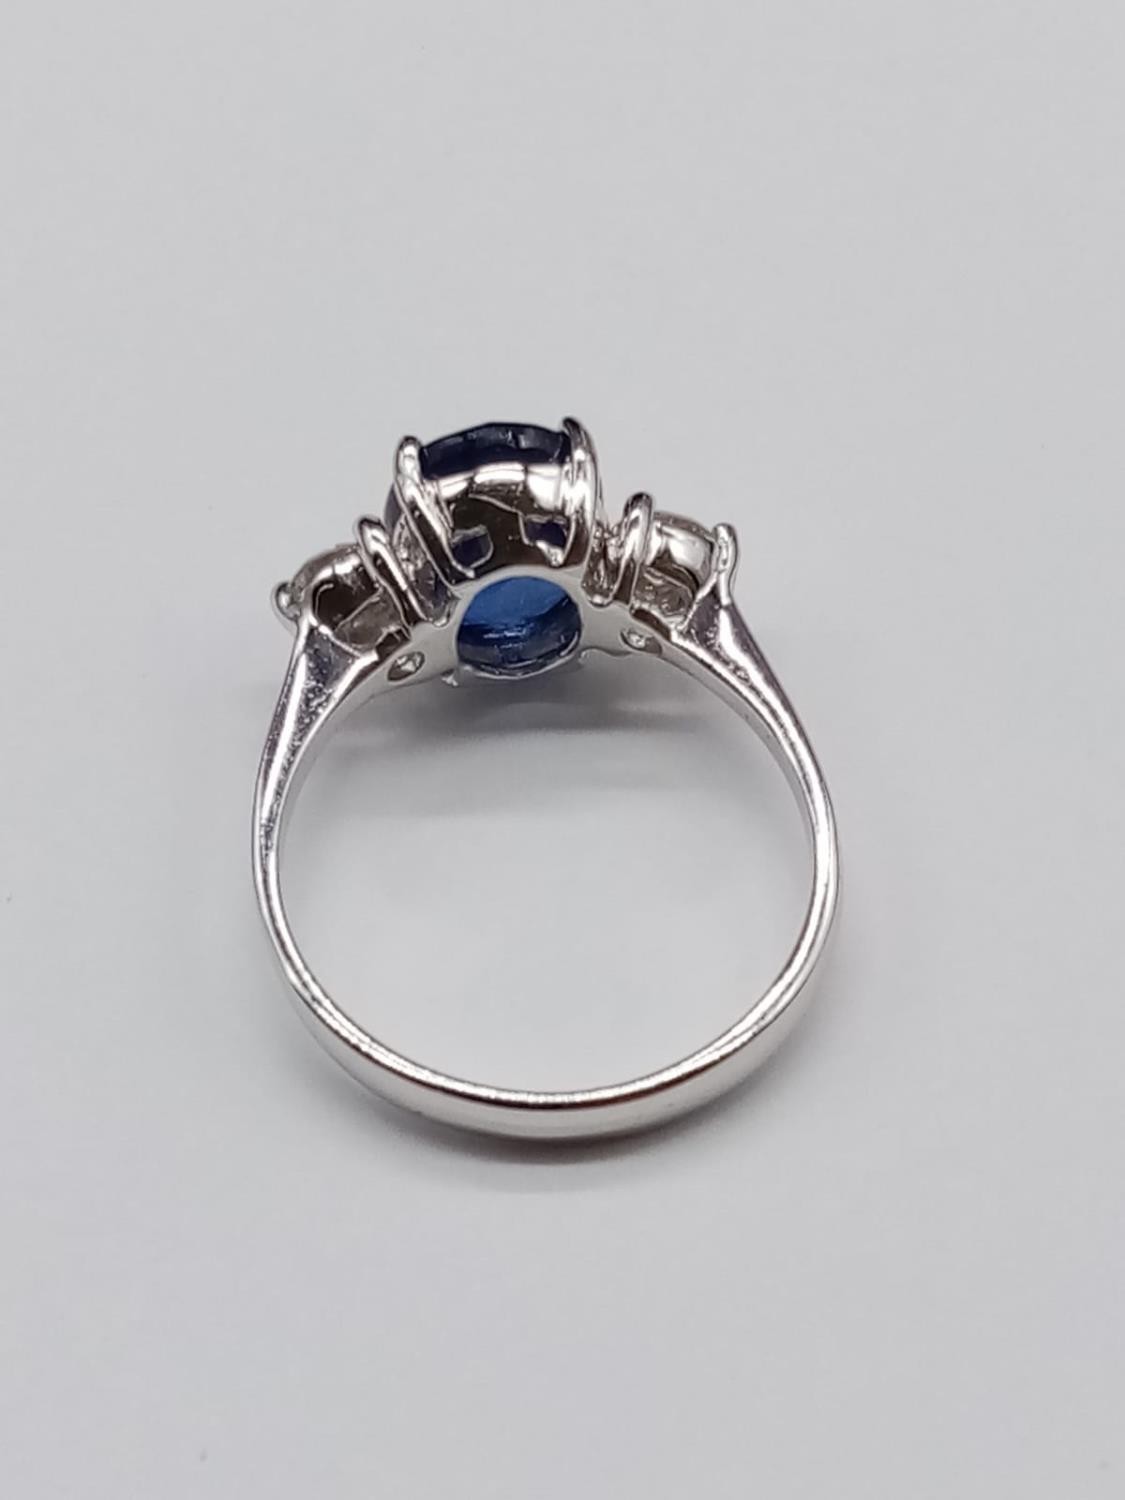 18ct White Gold RING set with one oval cut natural Sapphire and 2x round brilliant cut natural - Image 5 of 12